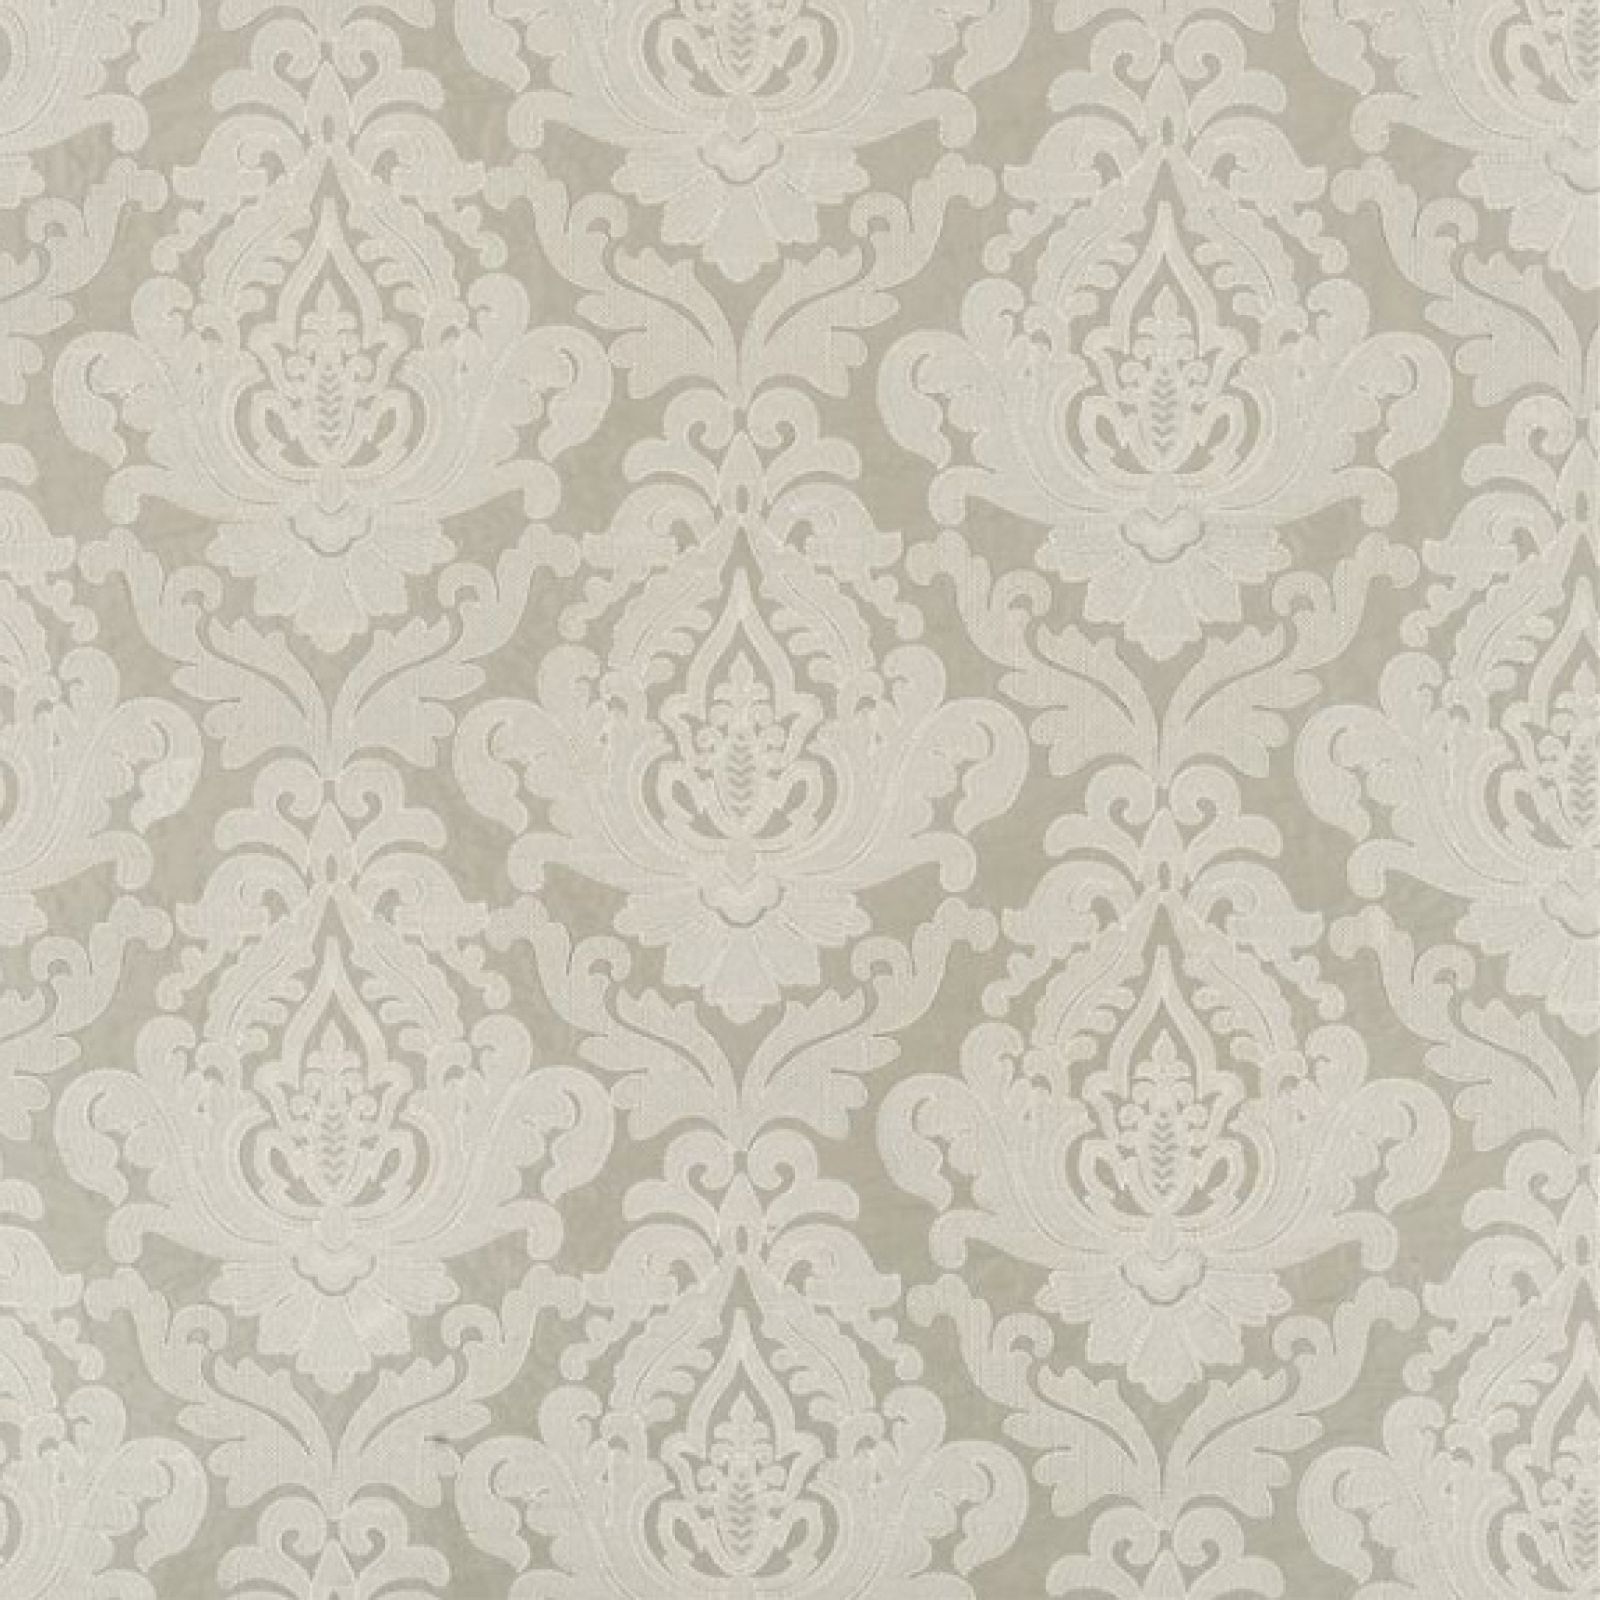 Connaught fabric - choice of 4 colourways